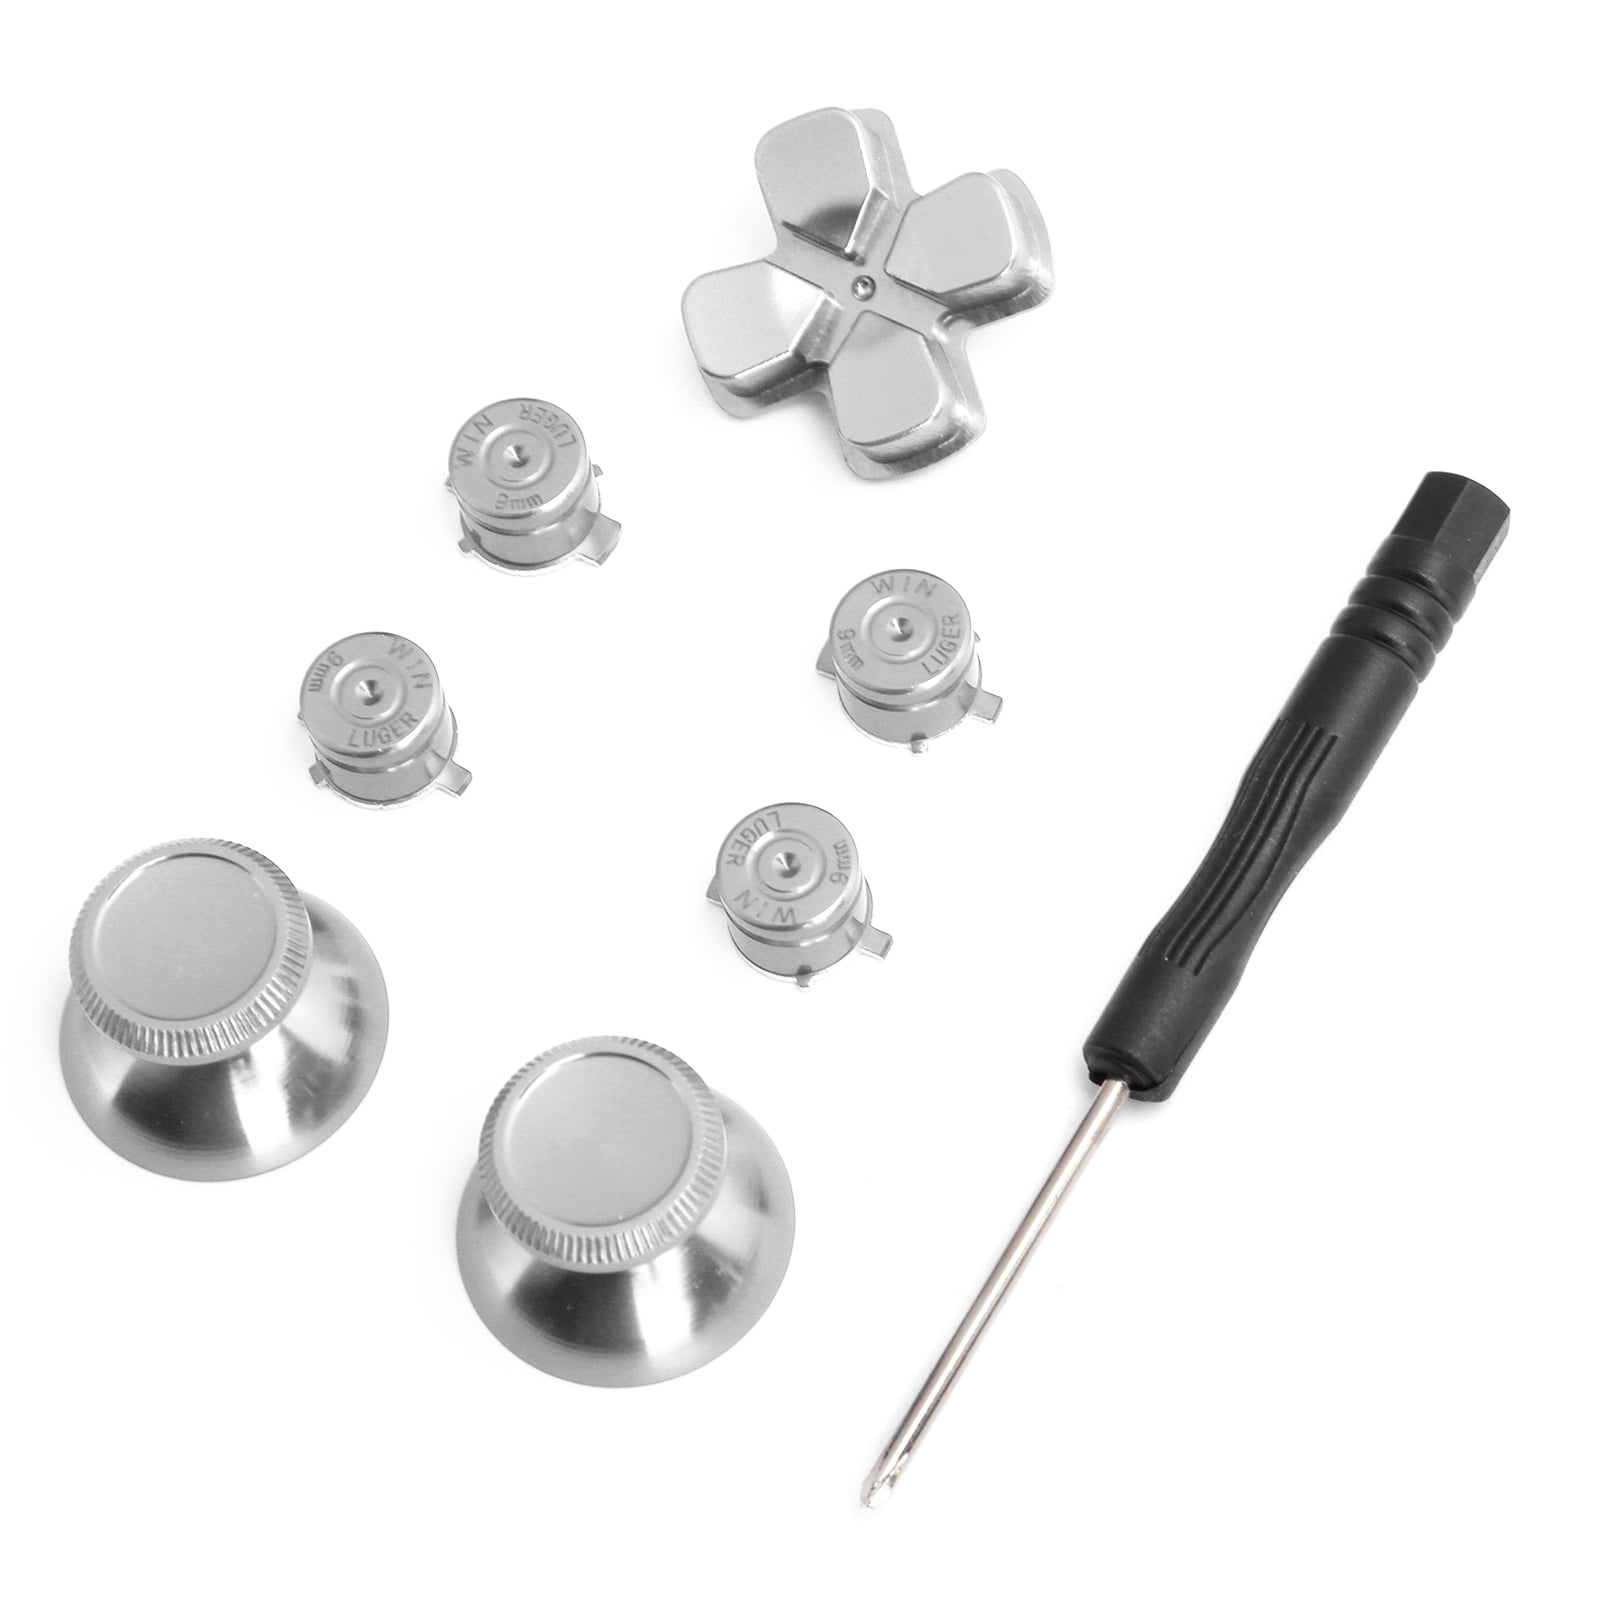 Controller Aluminum Alloy Botton Set, Aluminum Alloy Thumbsticks Set  Thumbsticks Replacement Kit With Screwdriver For Replacement Parts For  Controller Silver - Walmart.com